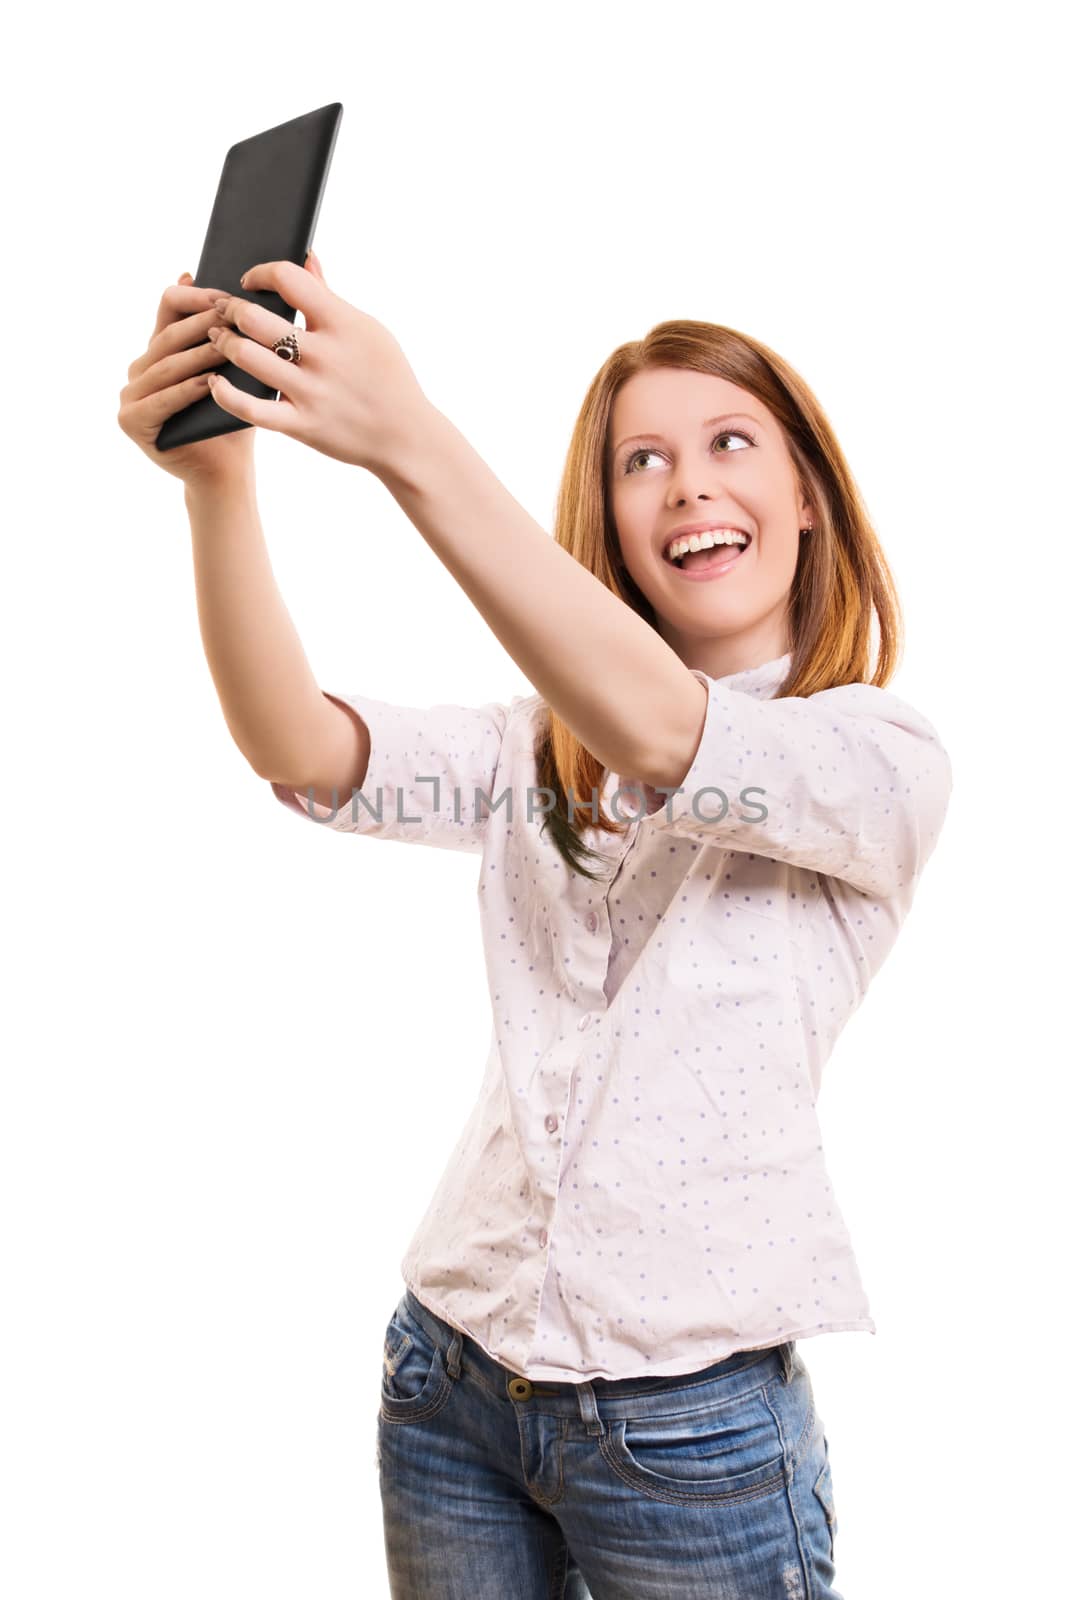 Smiling young girl taking a selfie with her tablet by Mendelex